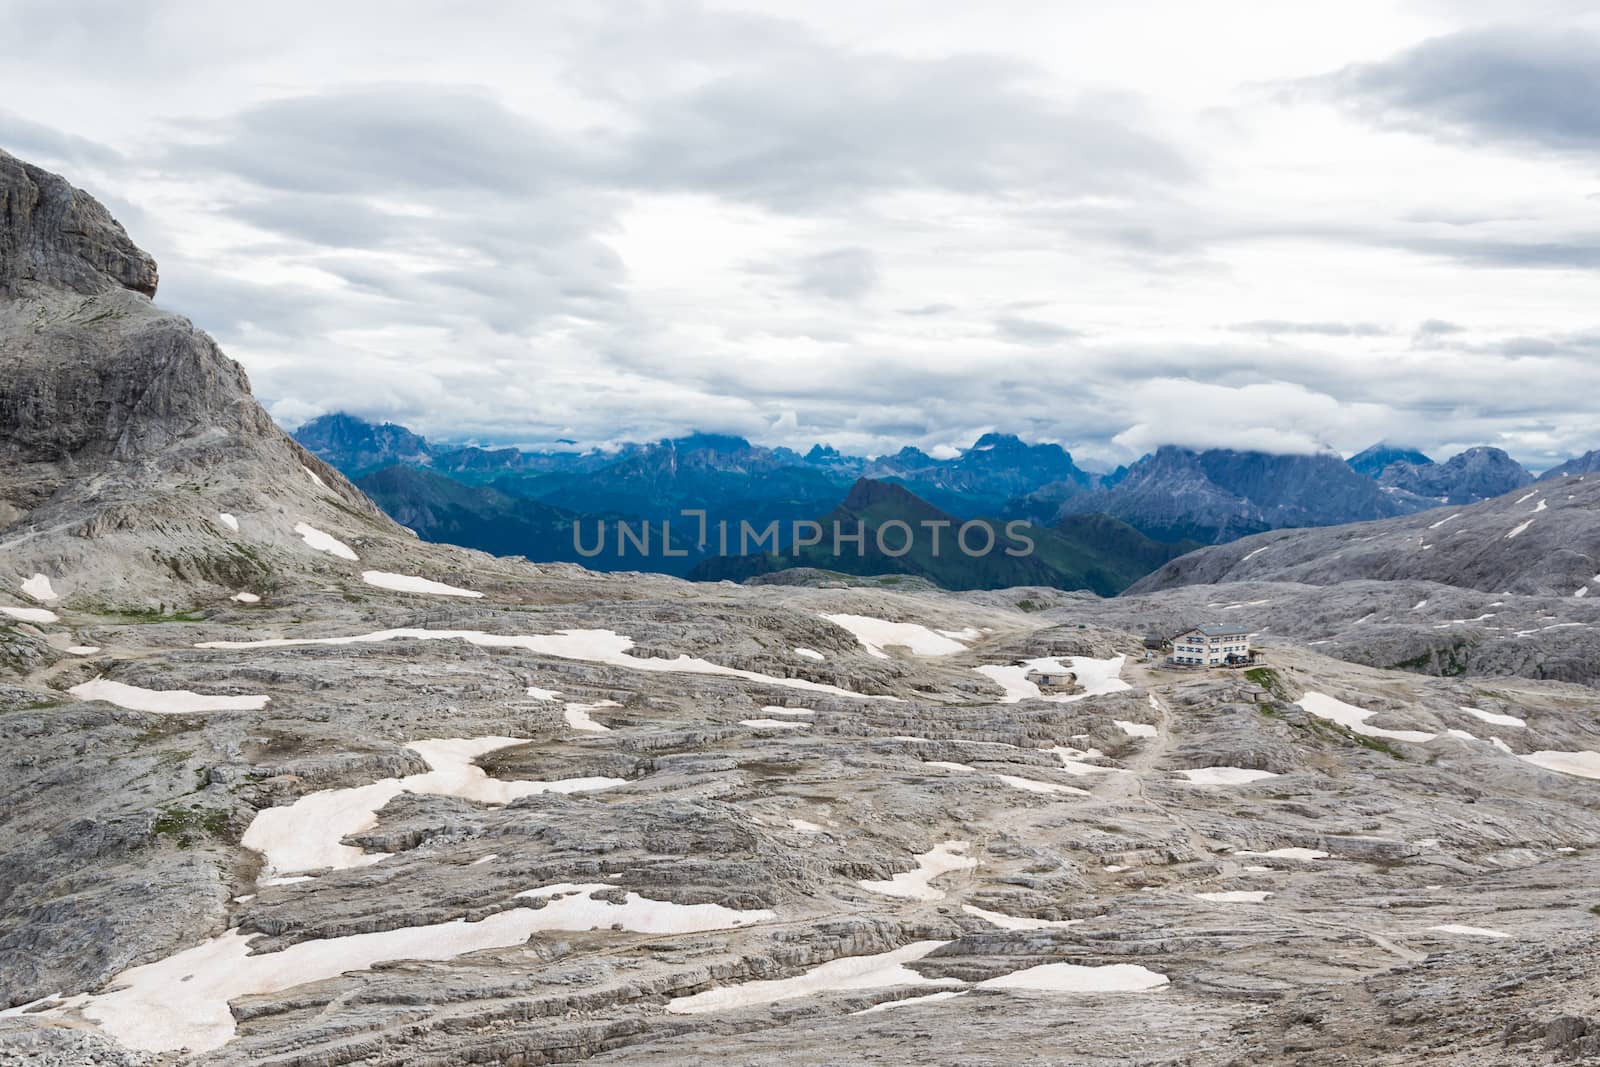 View of a snowfield in the Dolomites